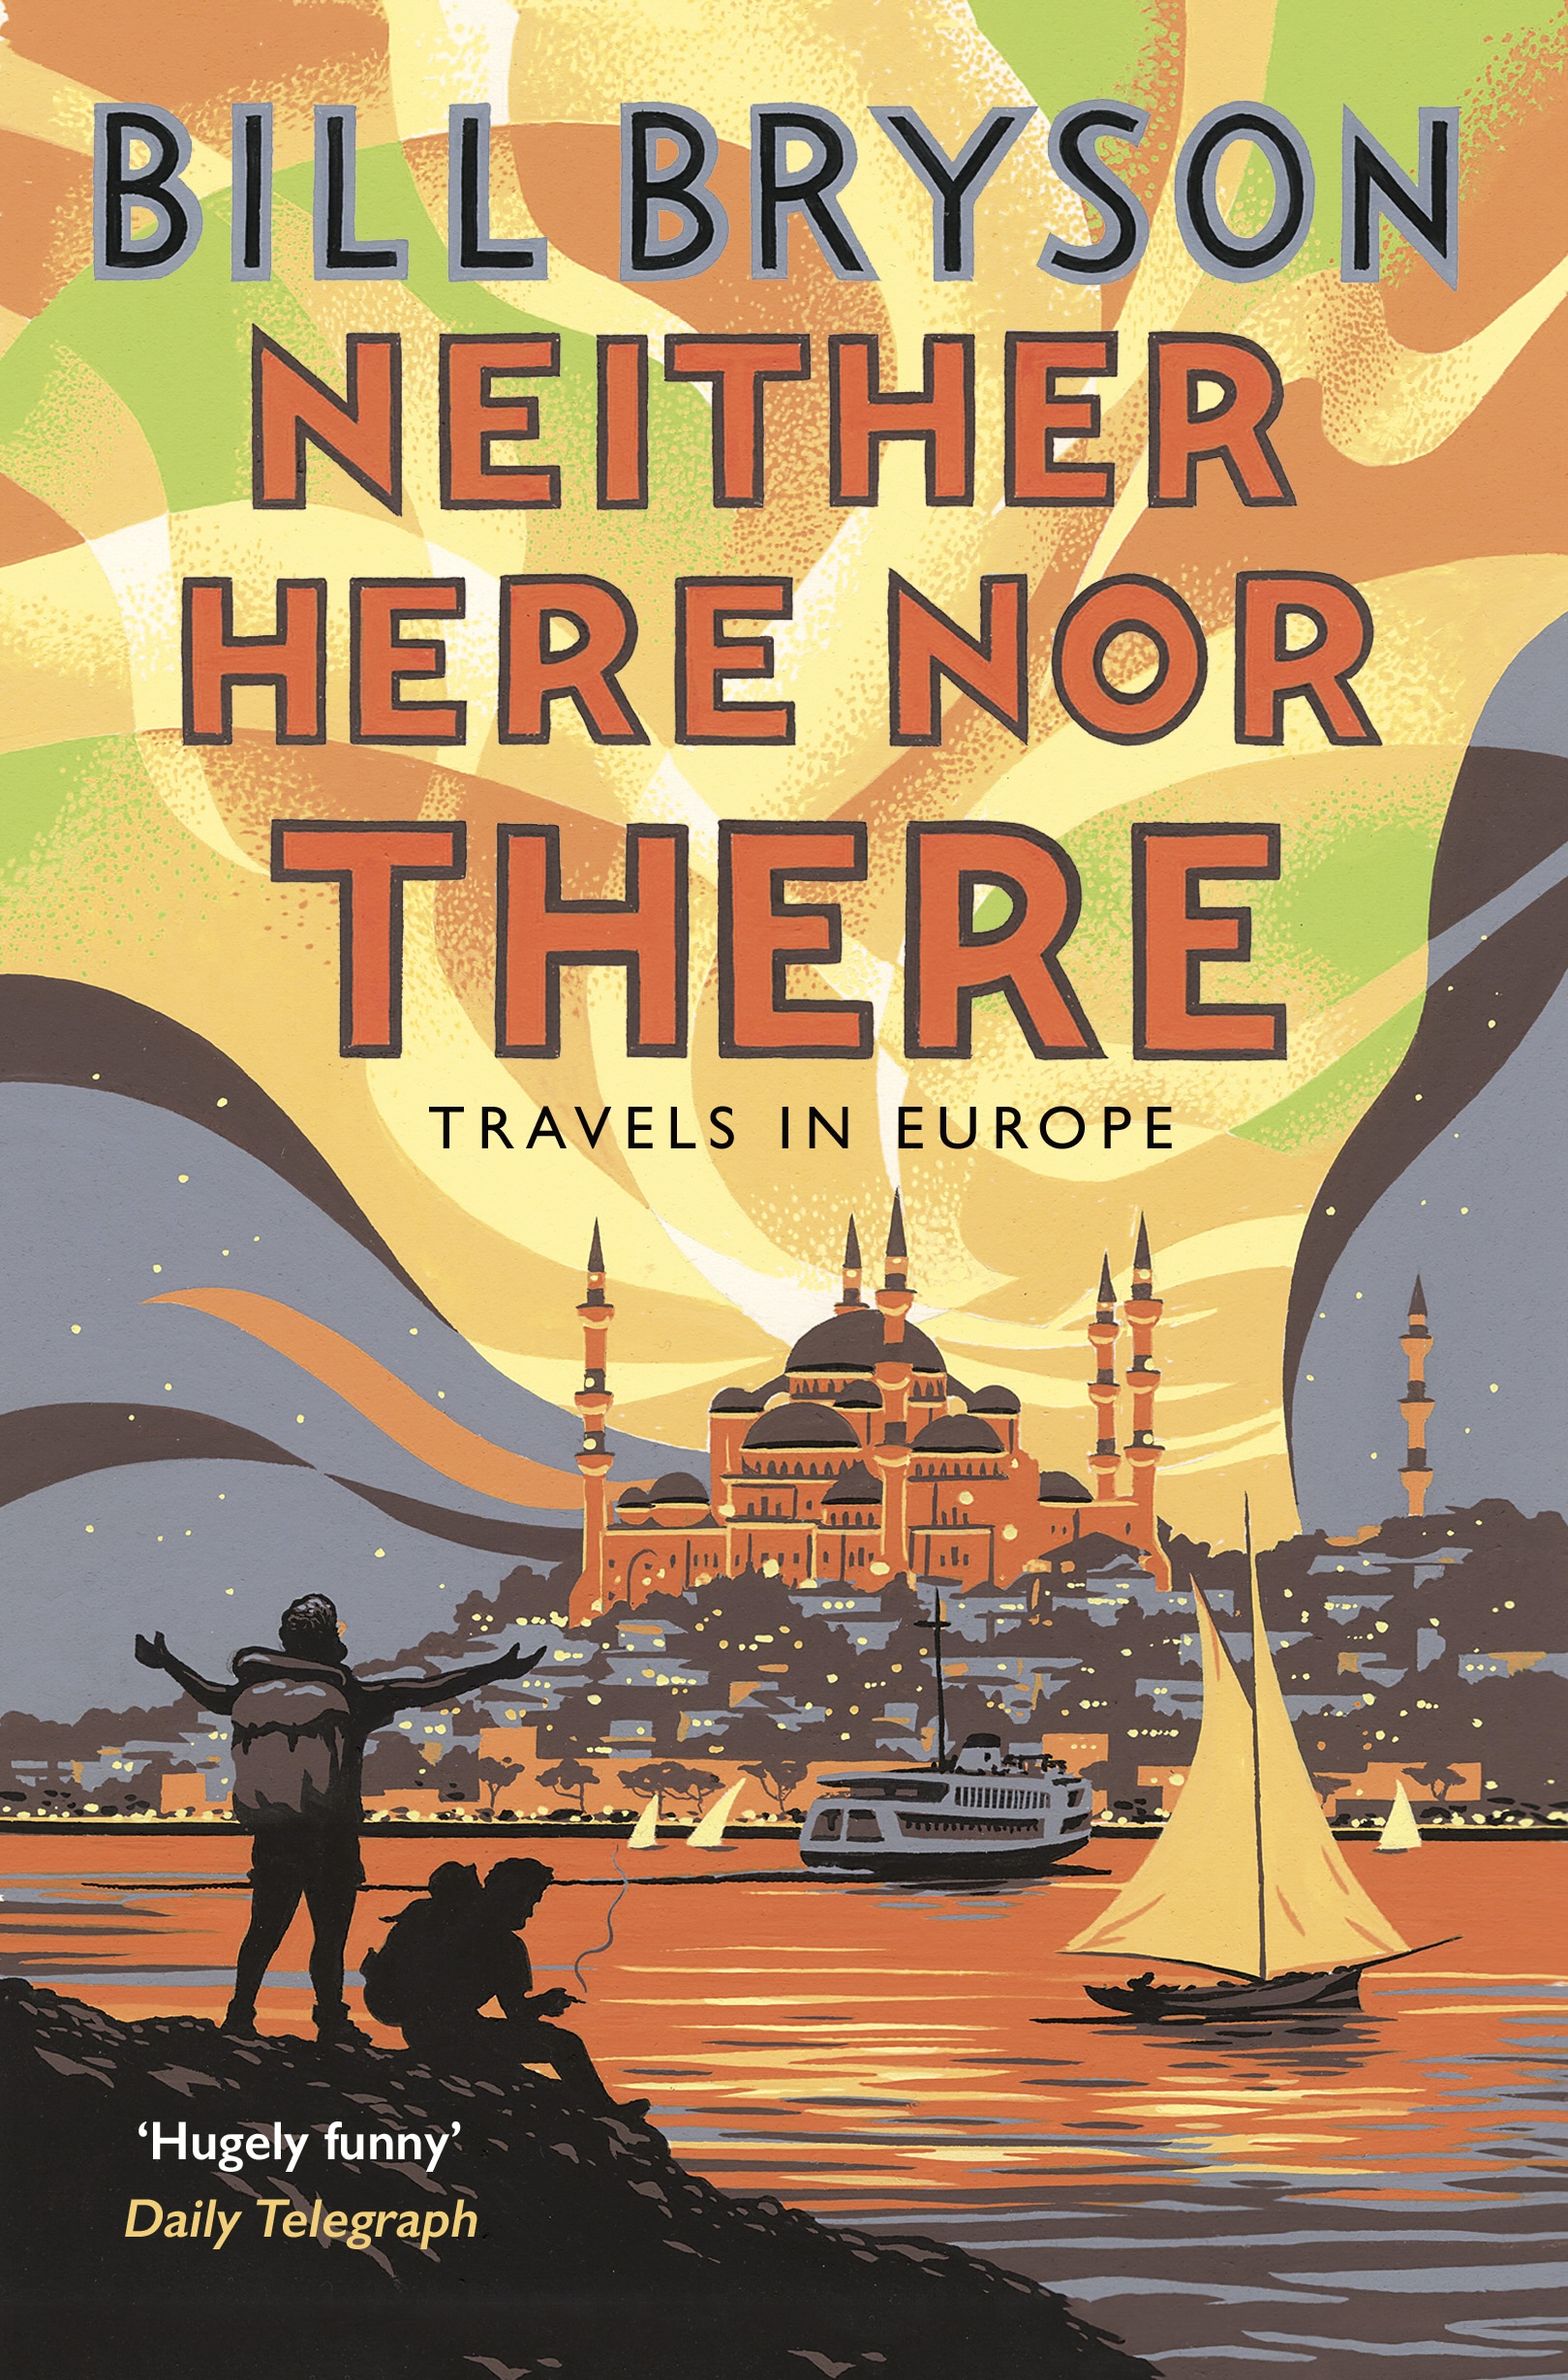 Book “Neither Here, Nor There” by Bill Bryson — November 5, 2015